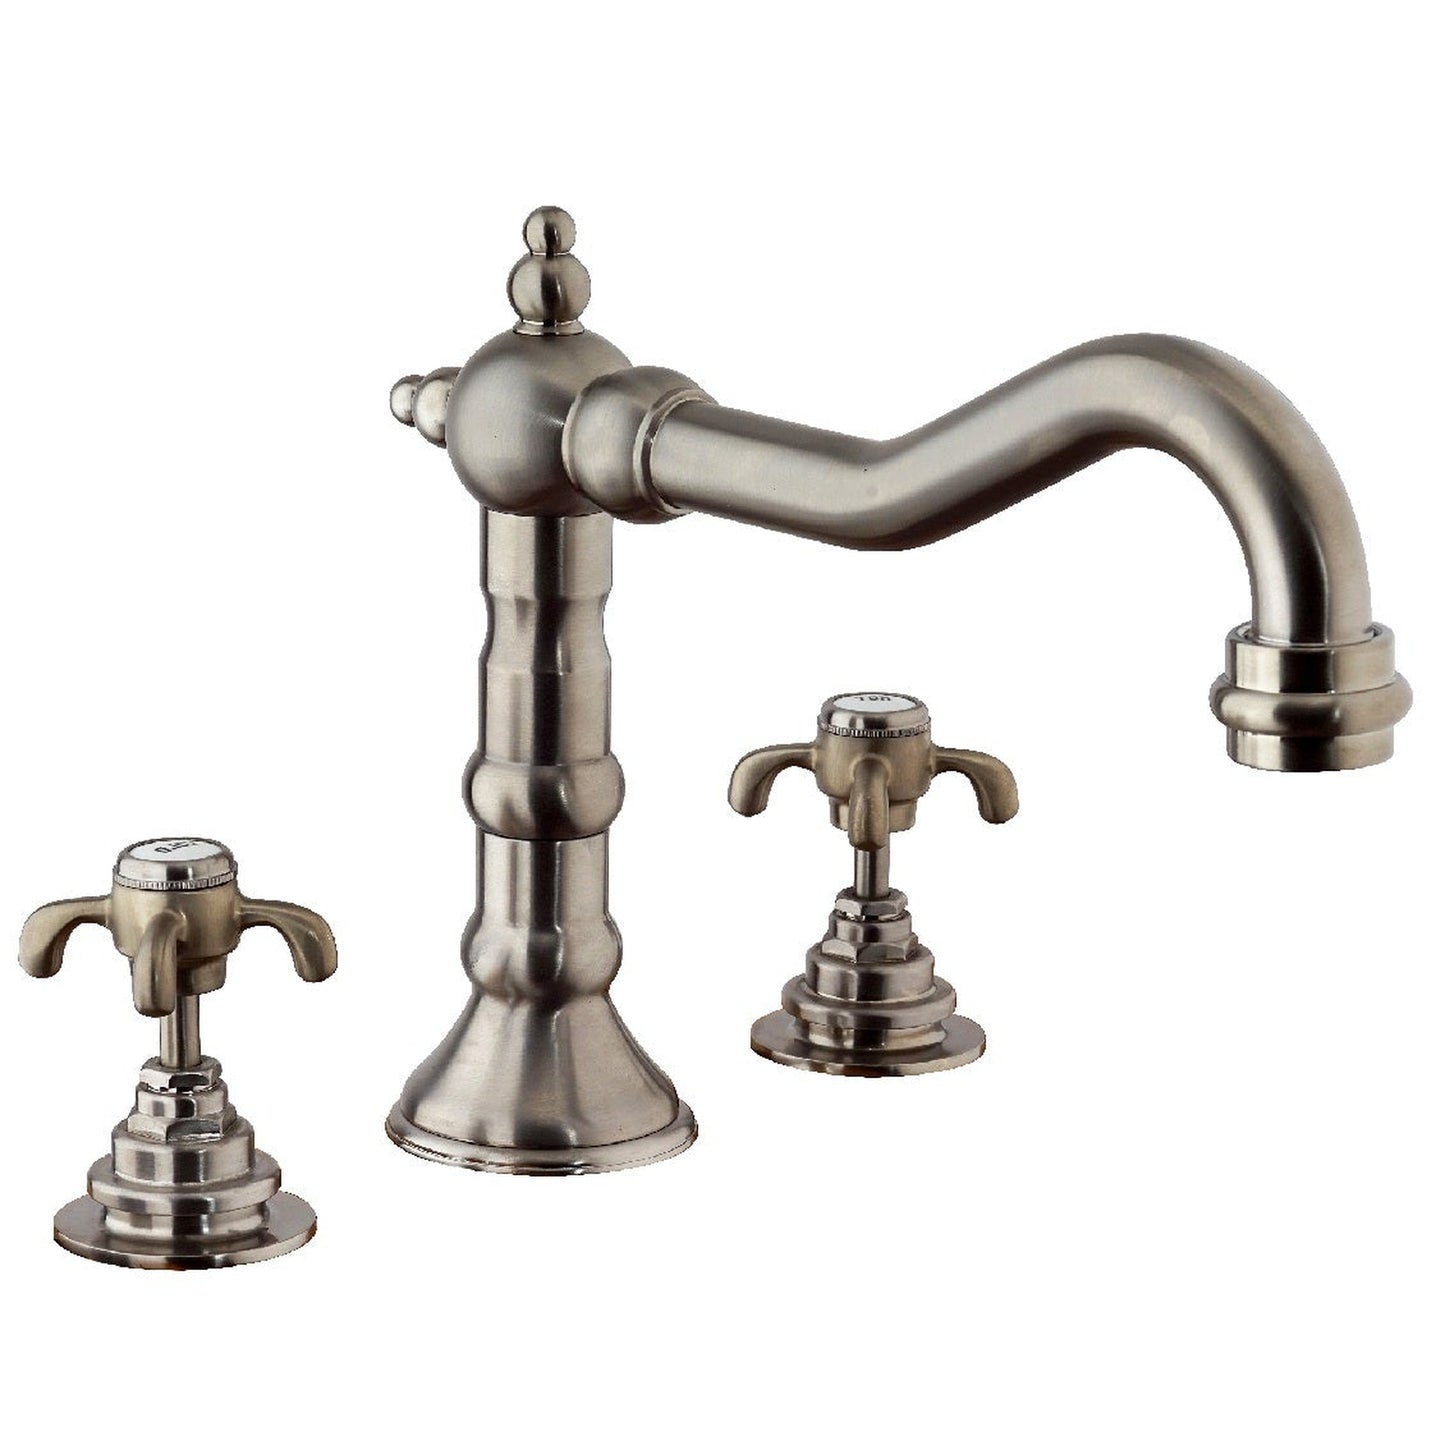 LaToscana Ornellaia Brushed Nickel Roman Tub Faucet With Cross Handles